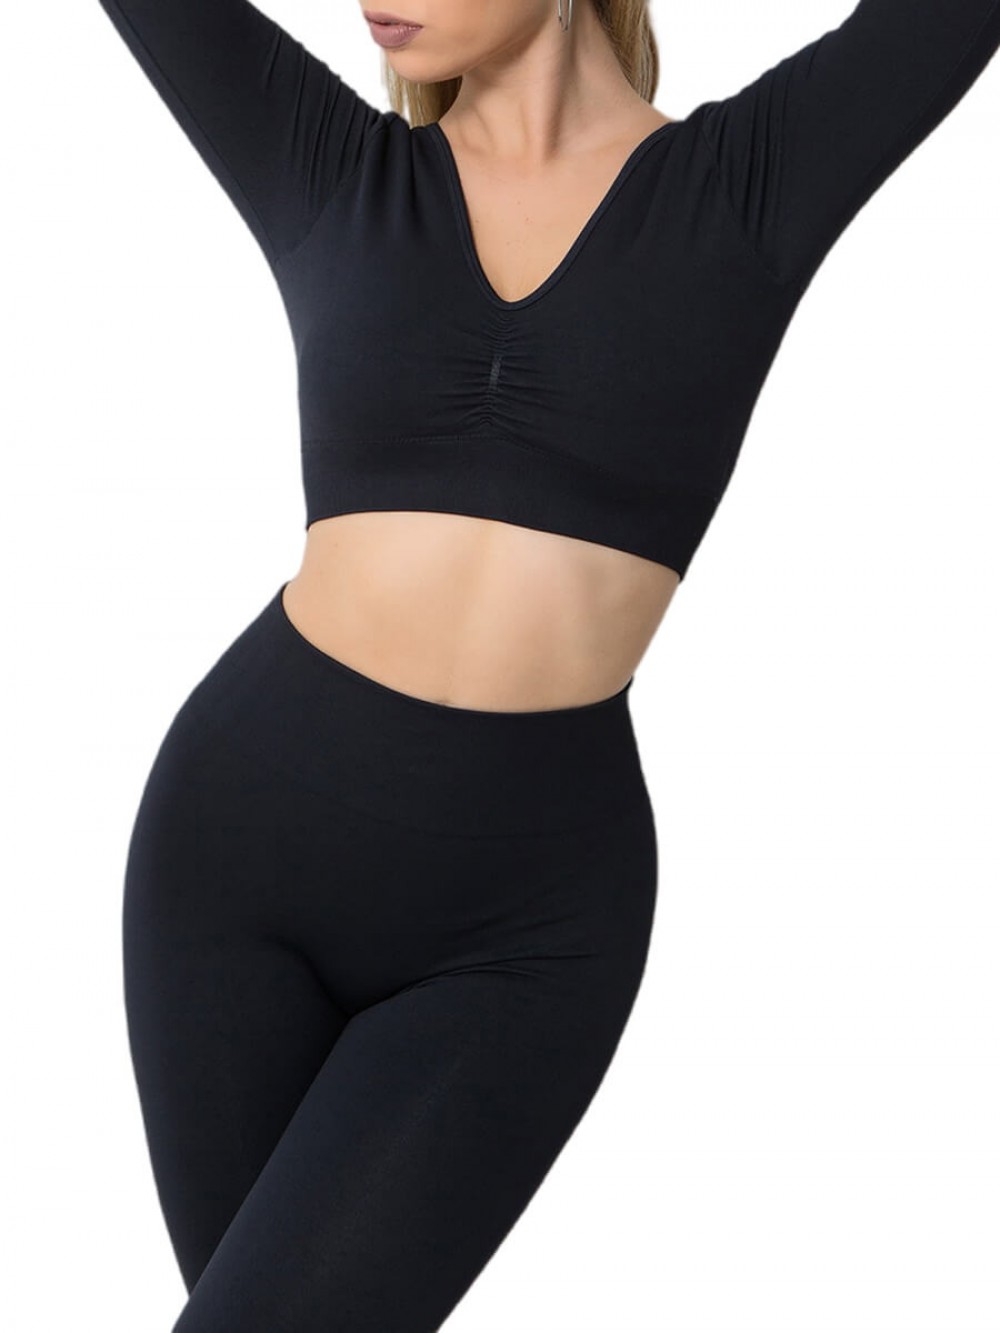 Black Stylish Well-Suited Workout Apparel For Hanging Out